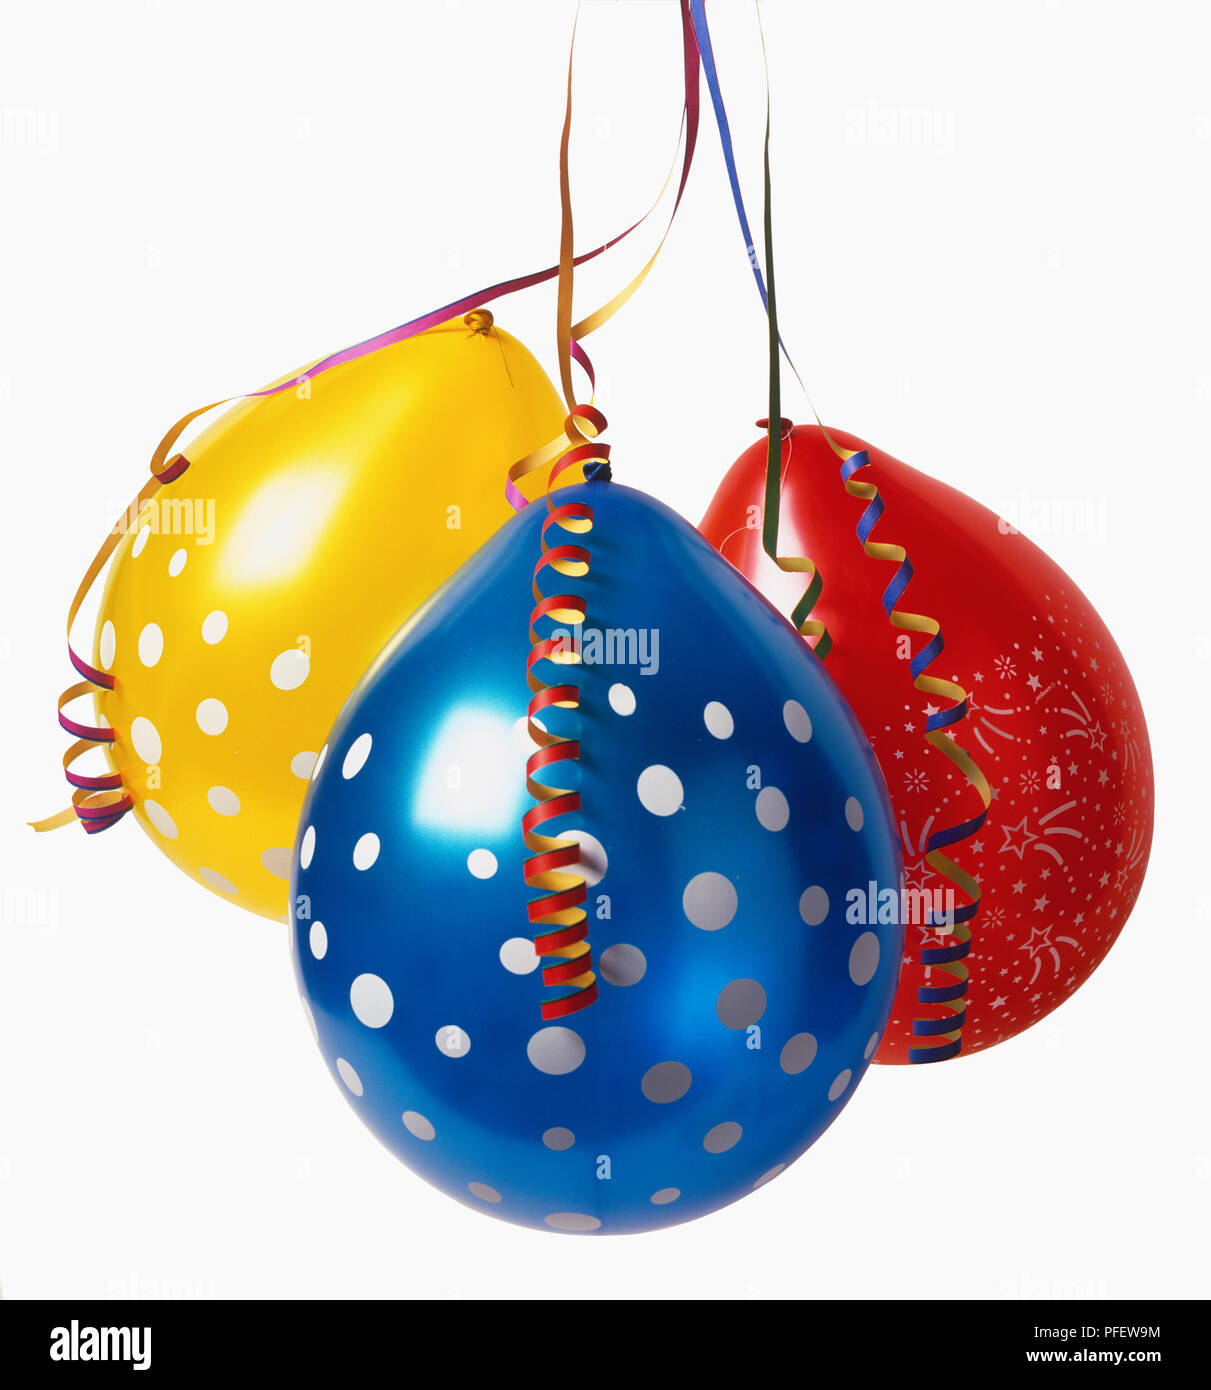 Red, yellow and blue balloons and curled ribbons. Stock Photo